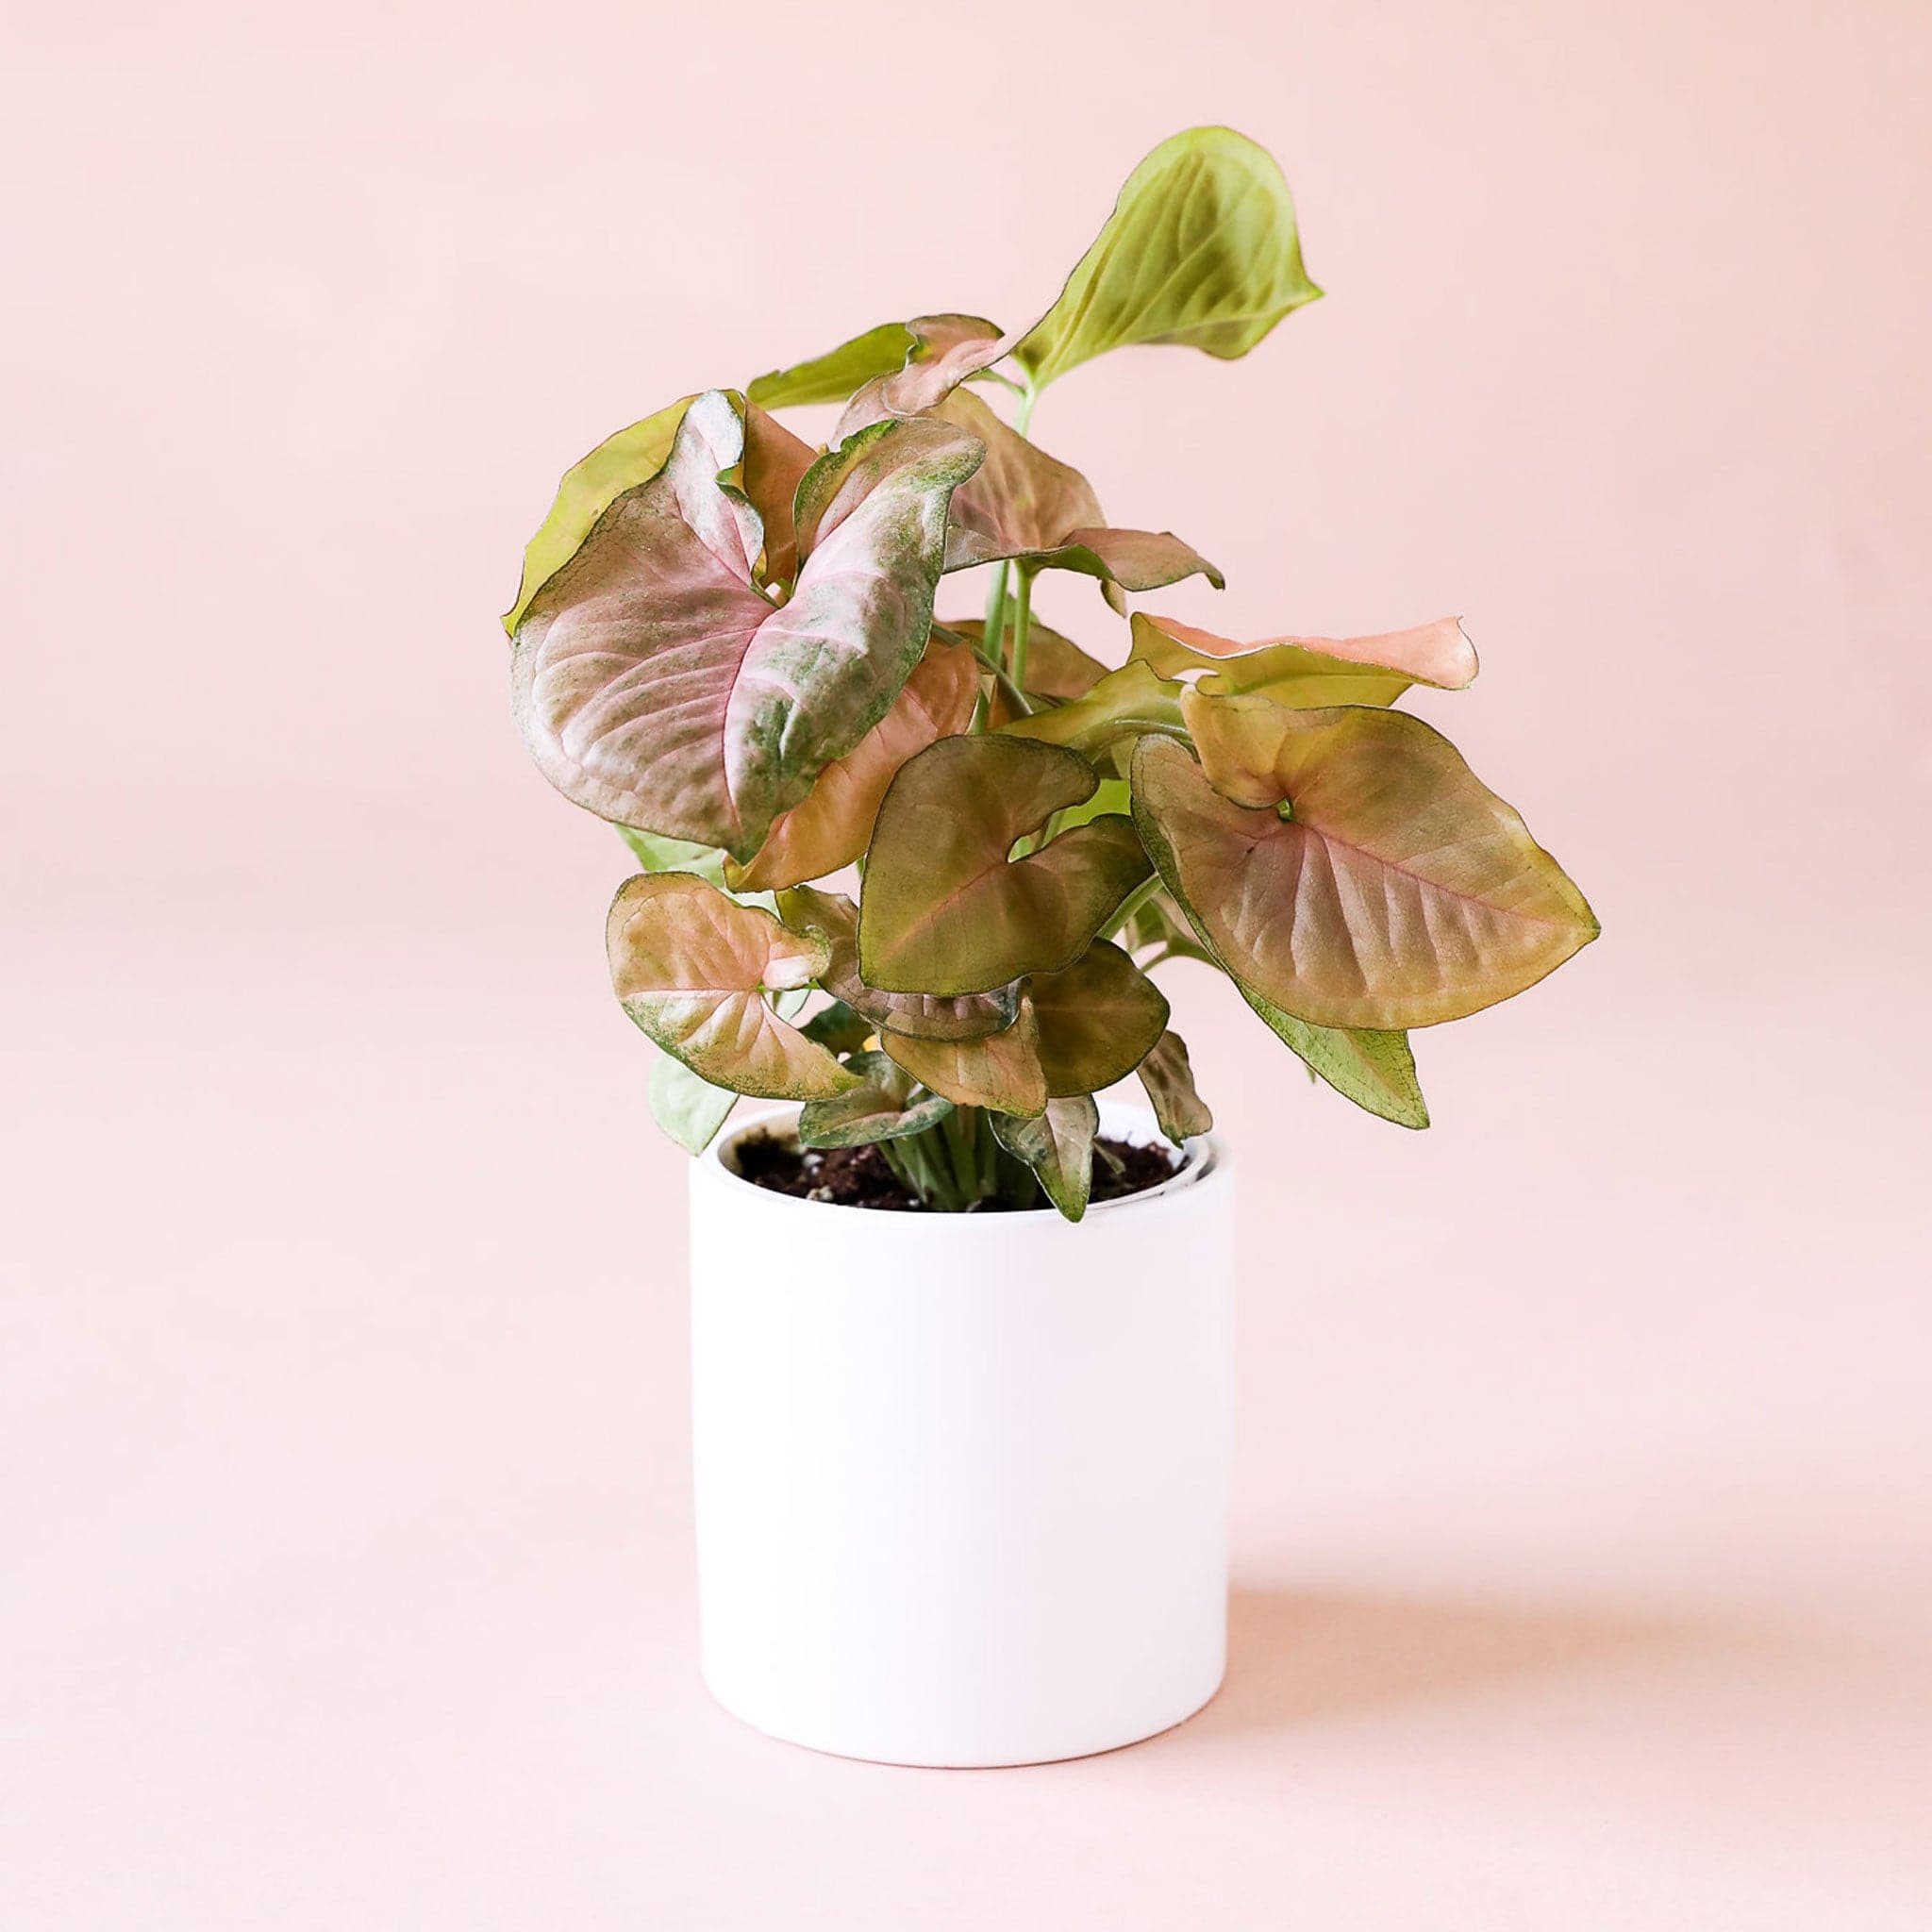 Against a soft pink background is a white, cylinder pot. Inside the pot is a tall, light green plant. The leaves are shaped like an arrowhead. The top of the leaves are dusted with a dusty rose color.